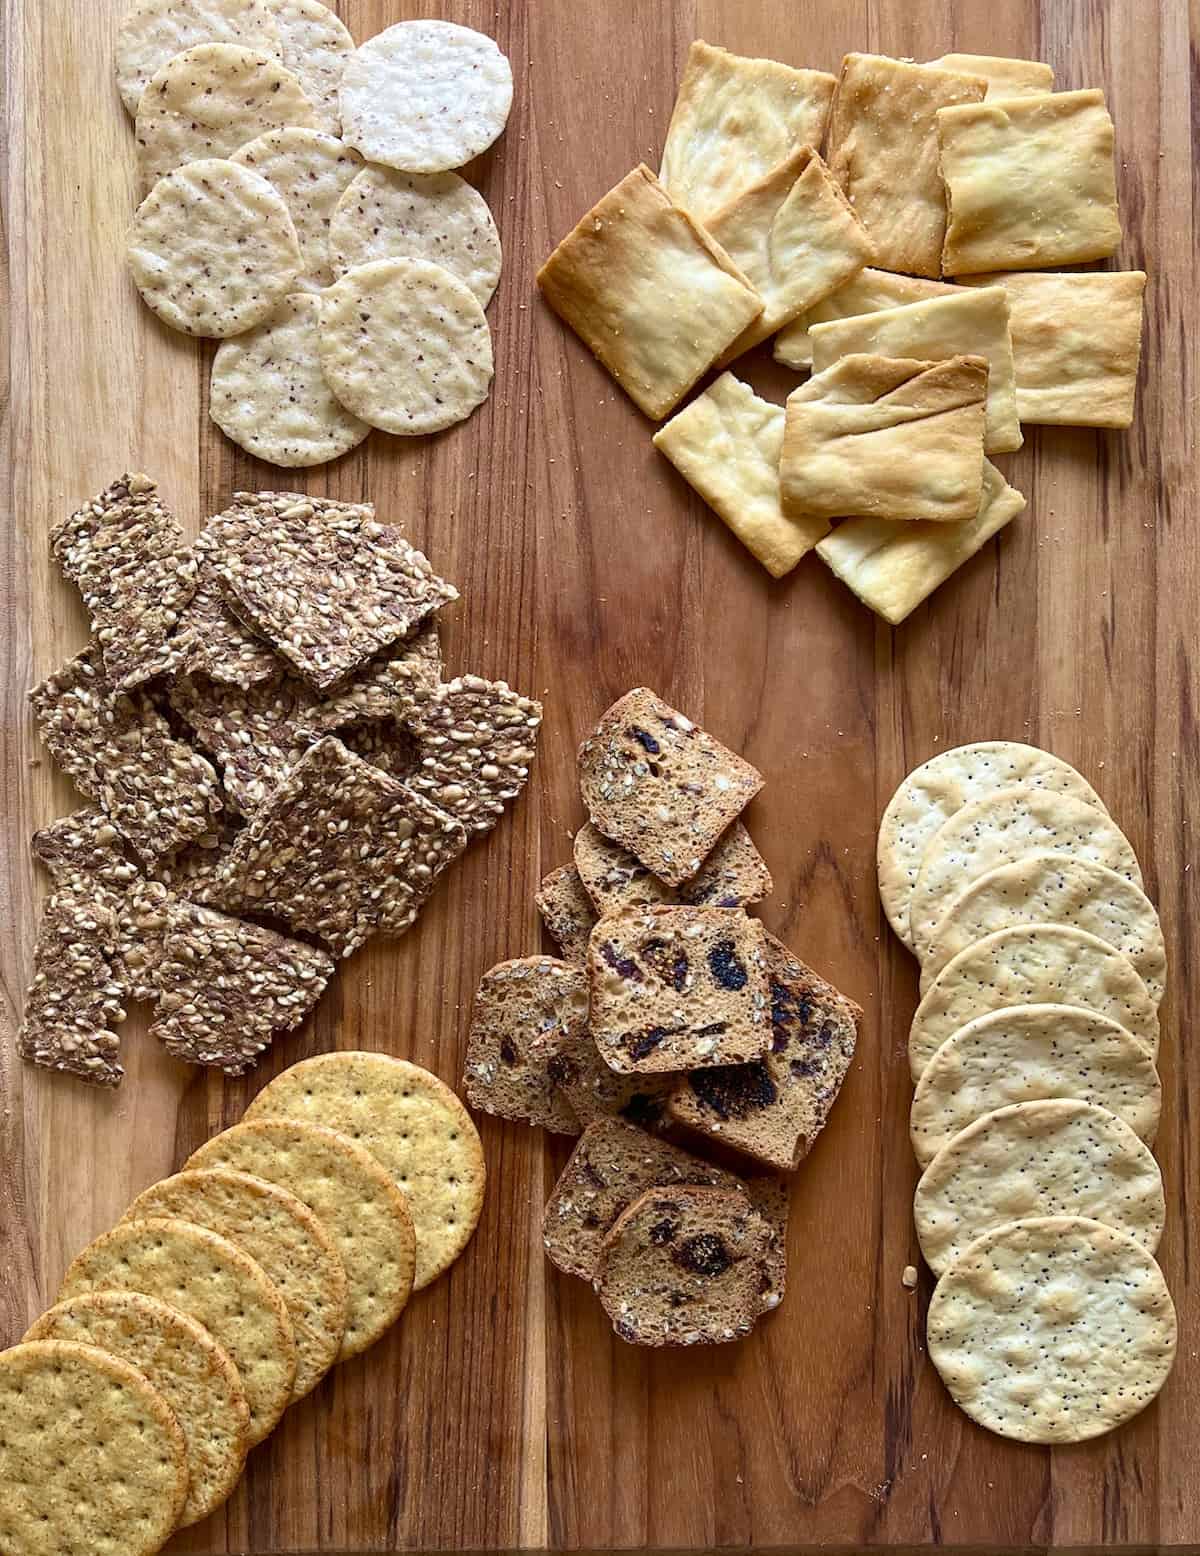 examples of crackers for a charcuterie board